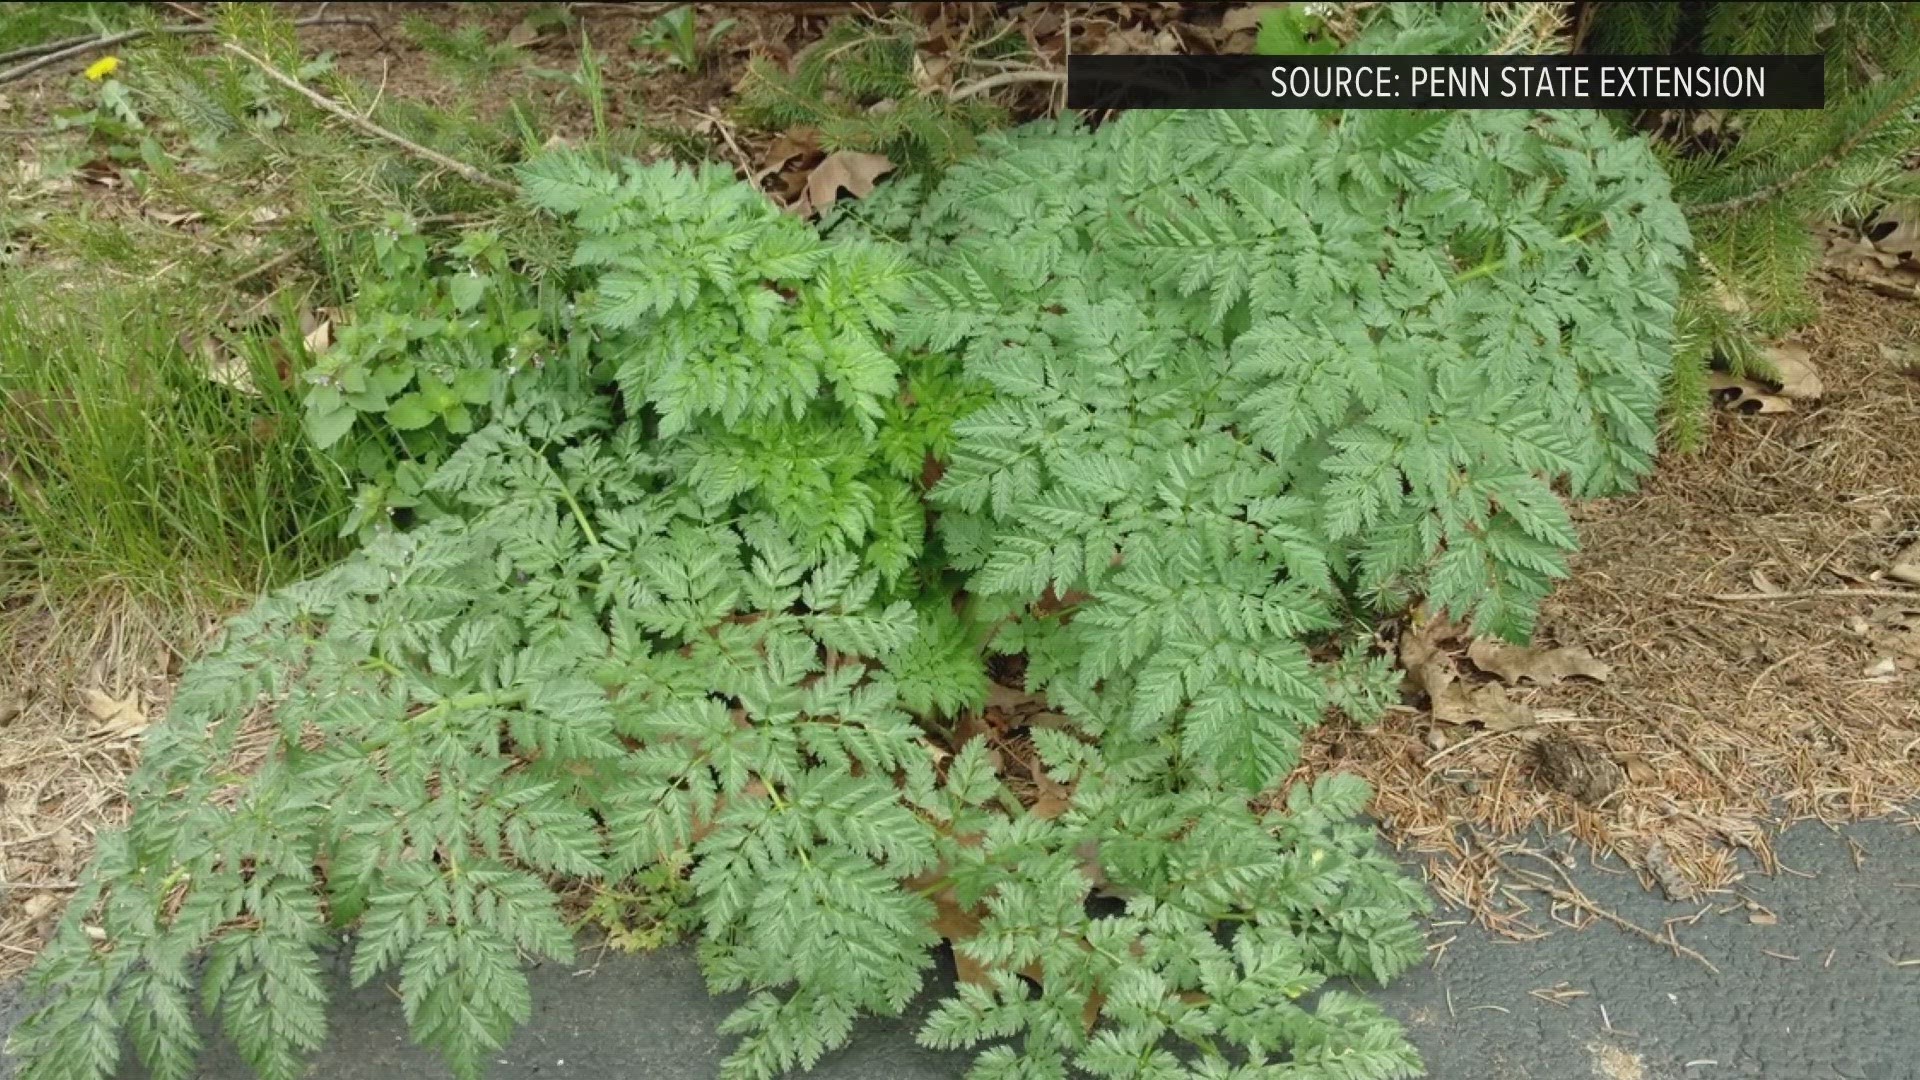 Experts believe the rapid spread of this invasive species likely means it is already present in northwest Ohio.